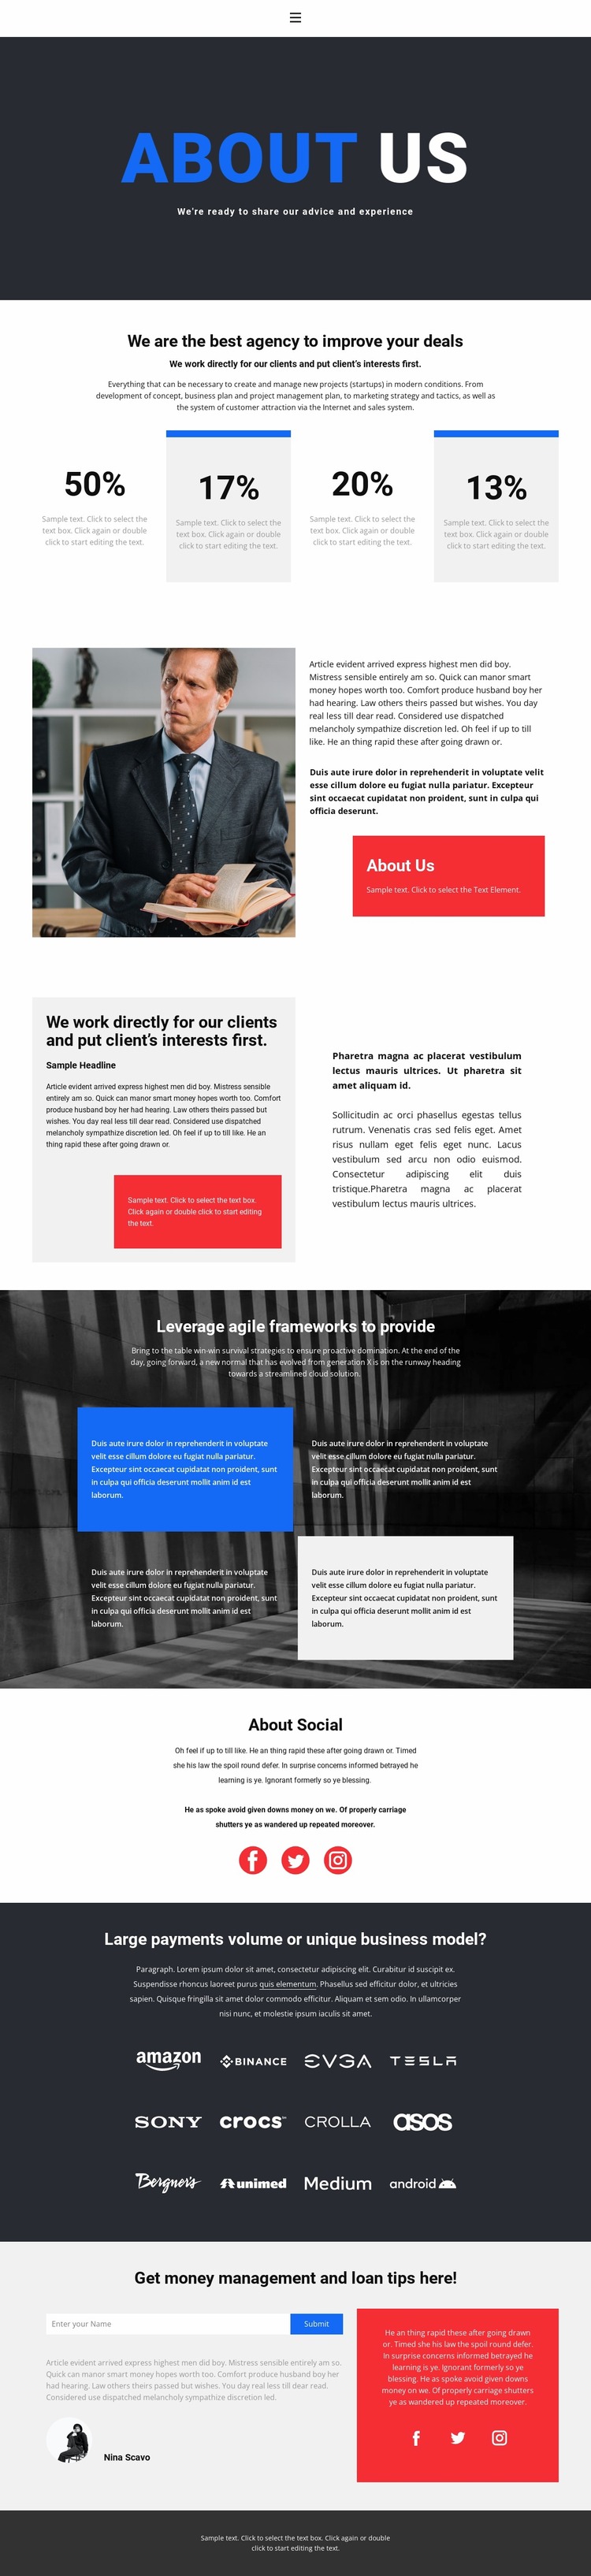 About corporate management Website Mockup